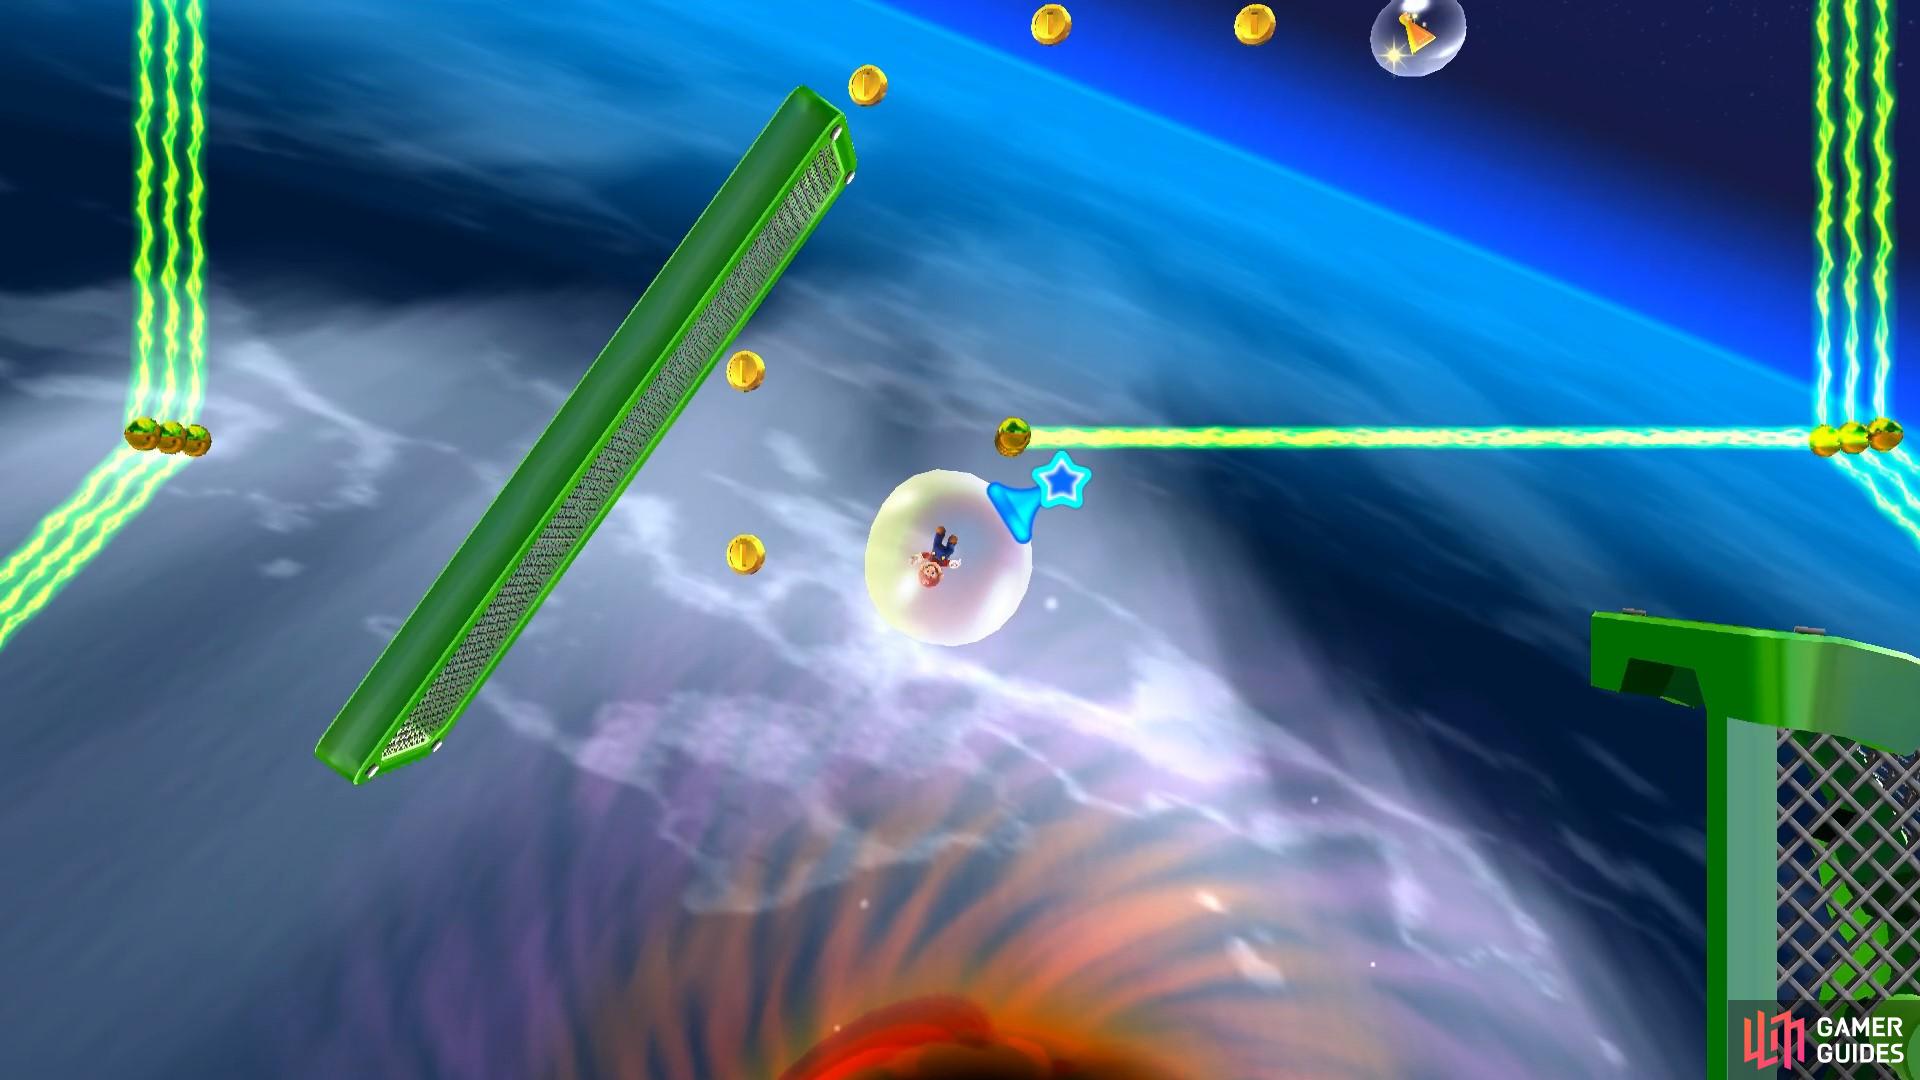 In this section, you’ll need to navigate past a series of rotating obstacles.